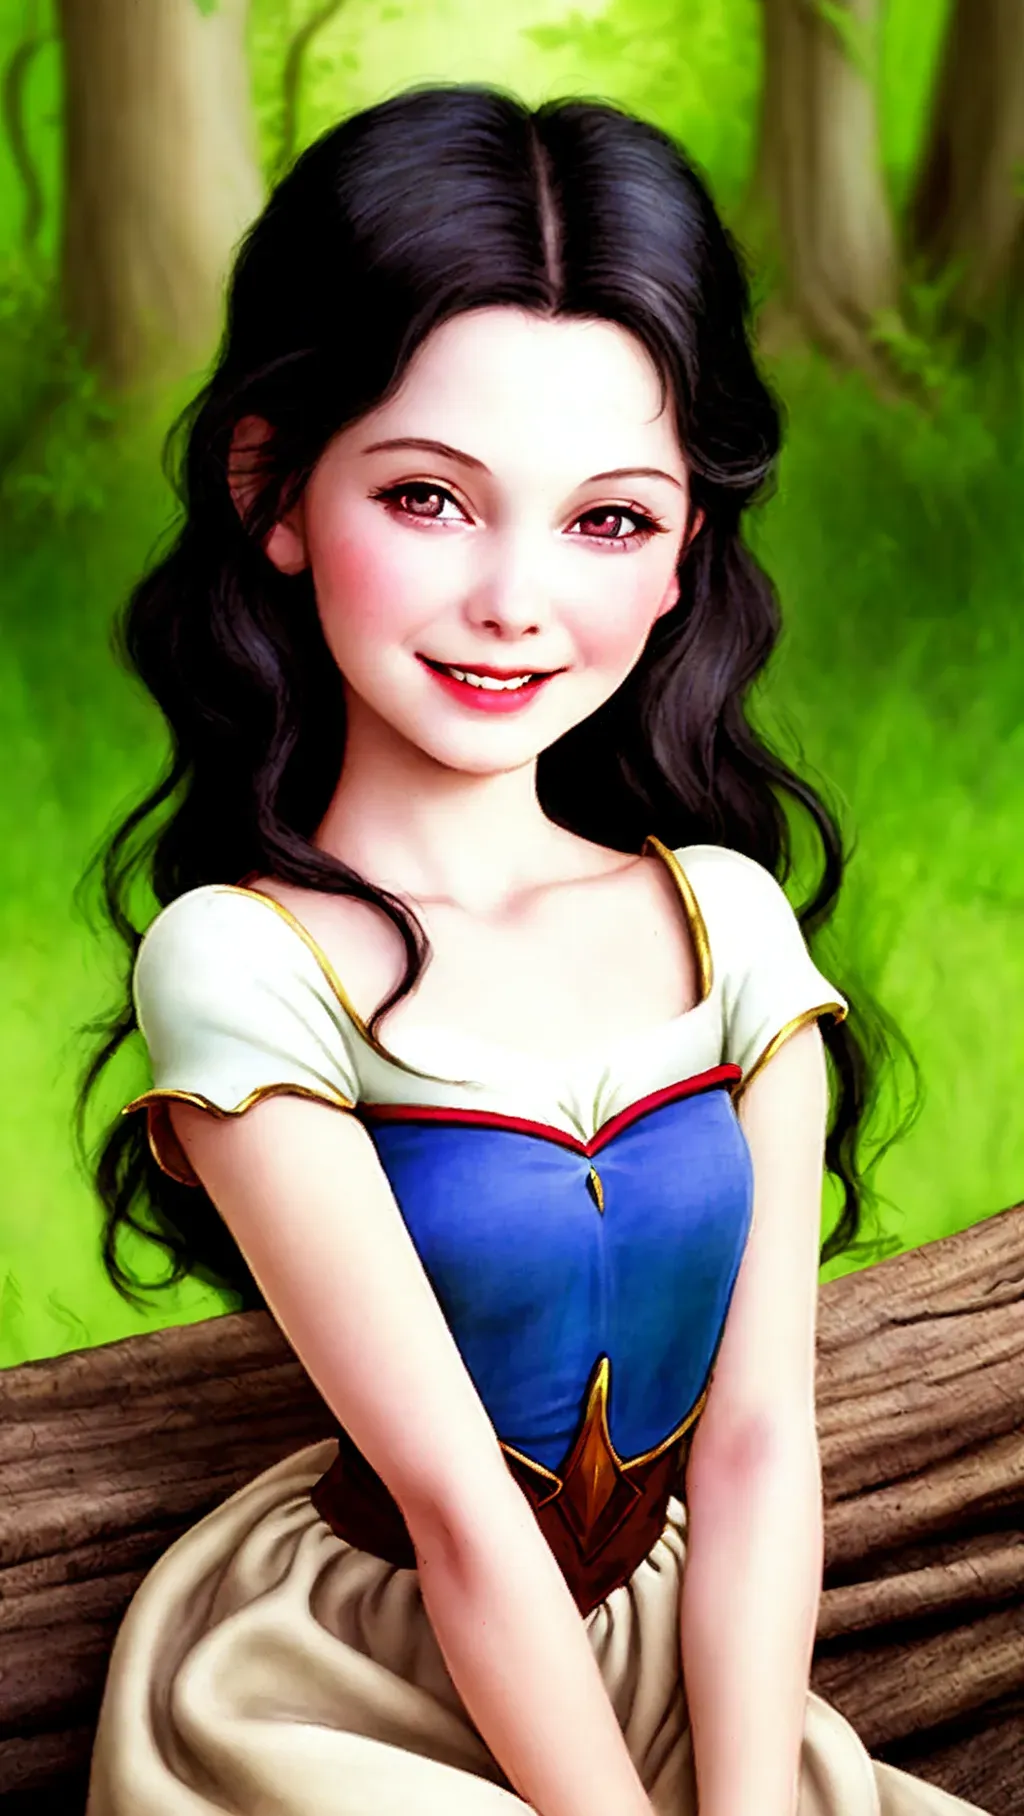 Dopamine Girl Disneys Snow White Illustrated In Realistic Concept Art Style Her Smile Is Cute 